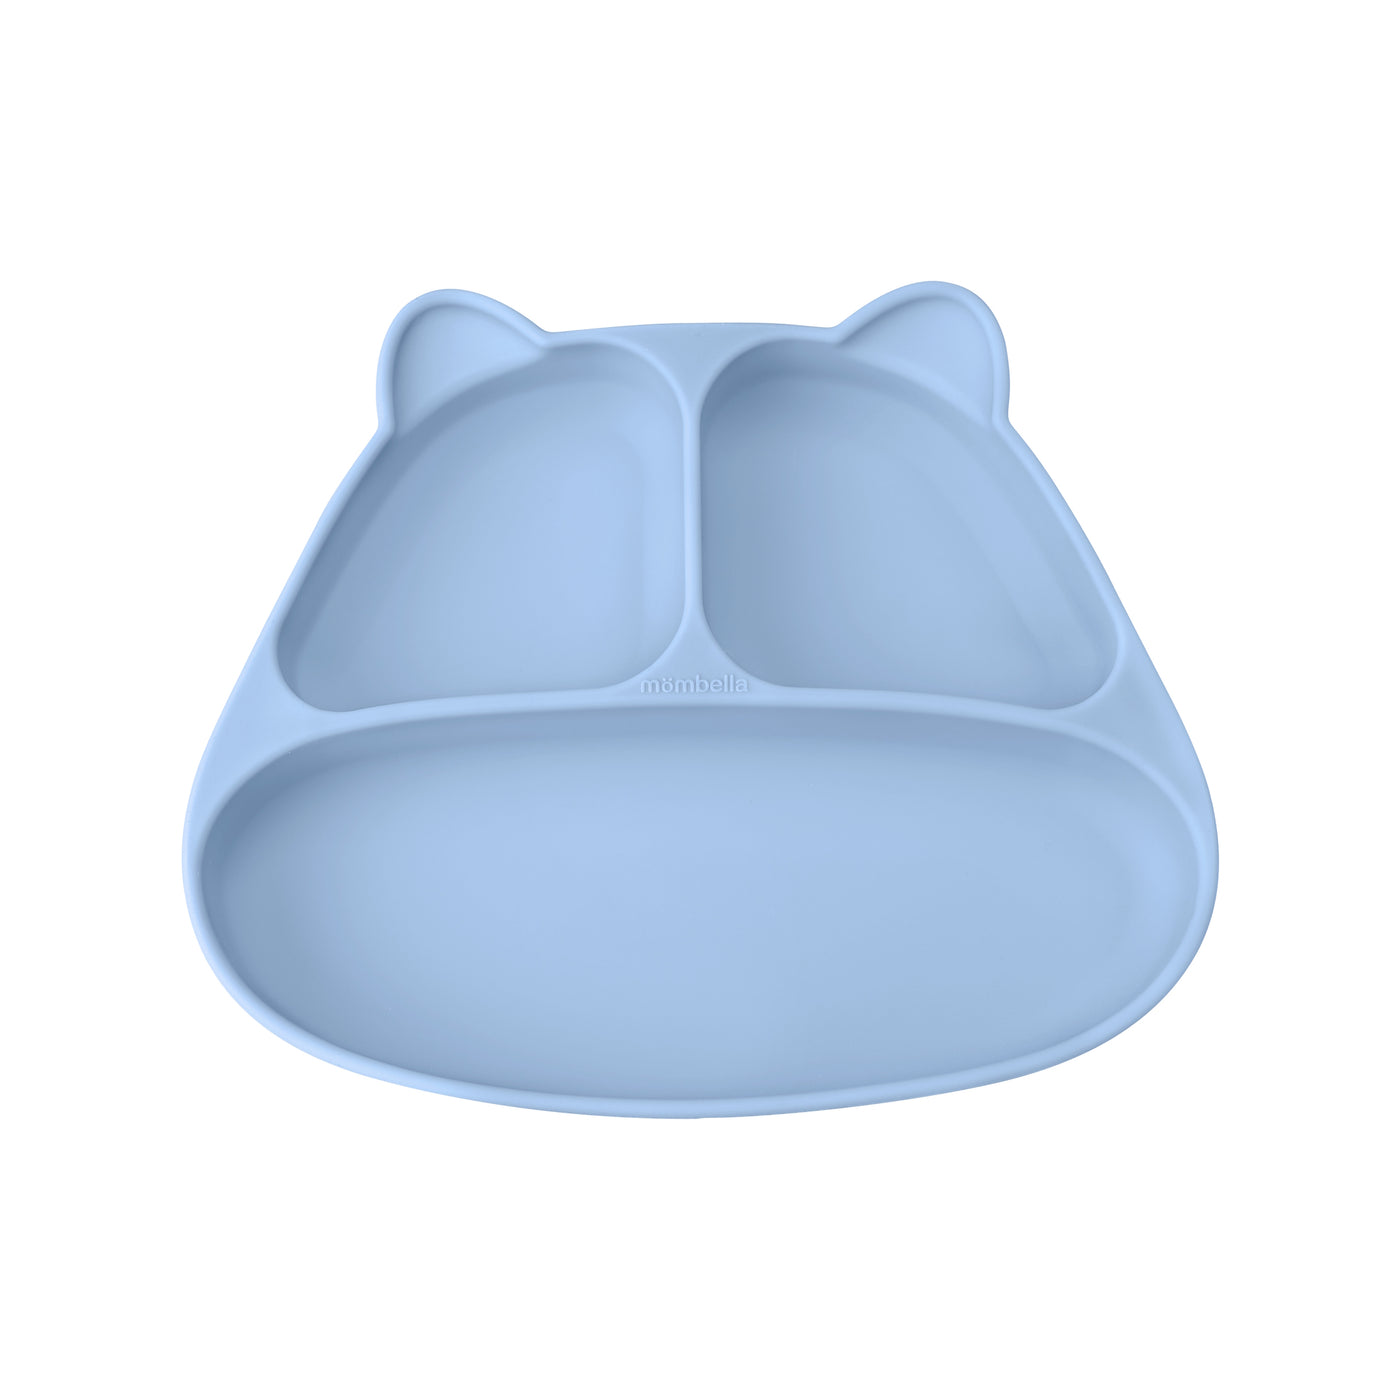 Panda Silicone Suction Dinner Plate - Light Blue